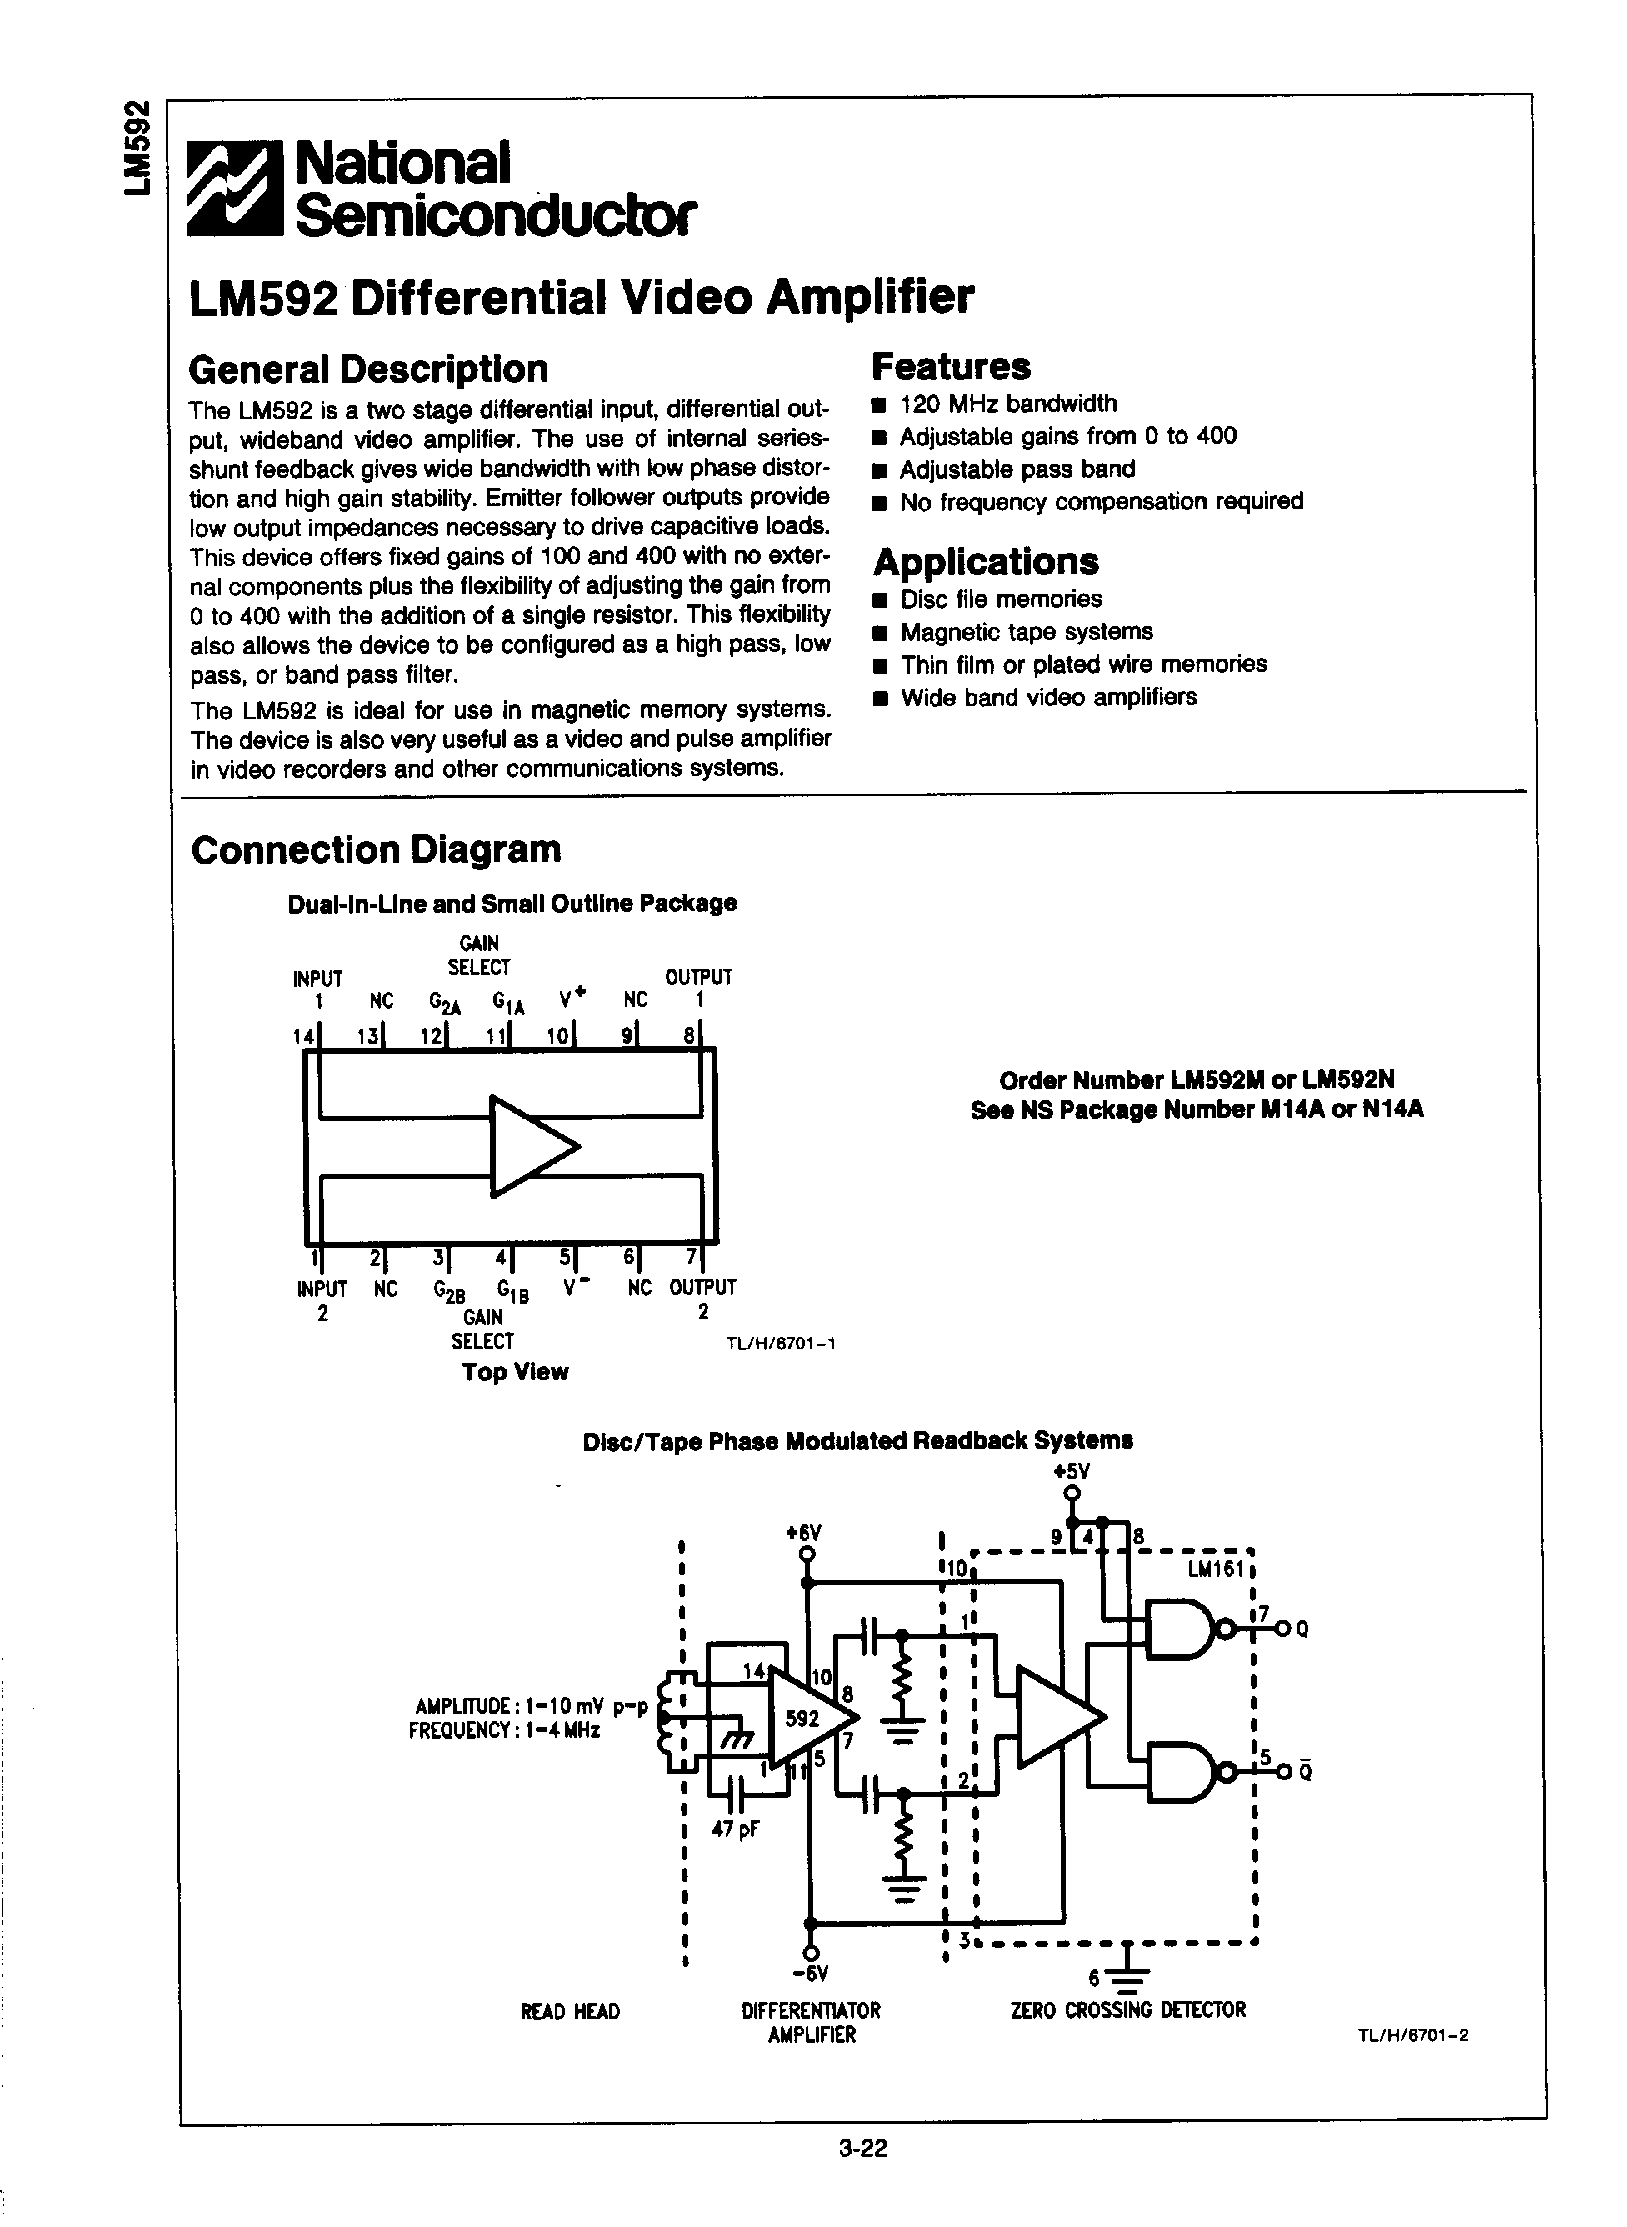 Datasheet LM592 - Differential Video Amplifier page 1